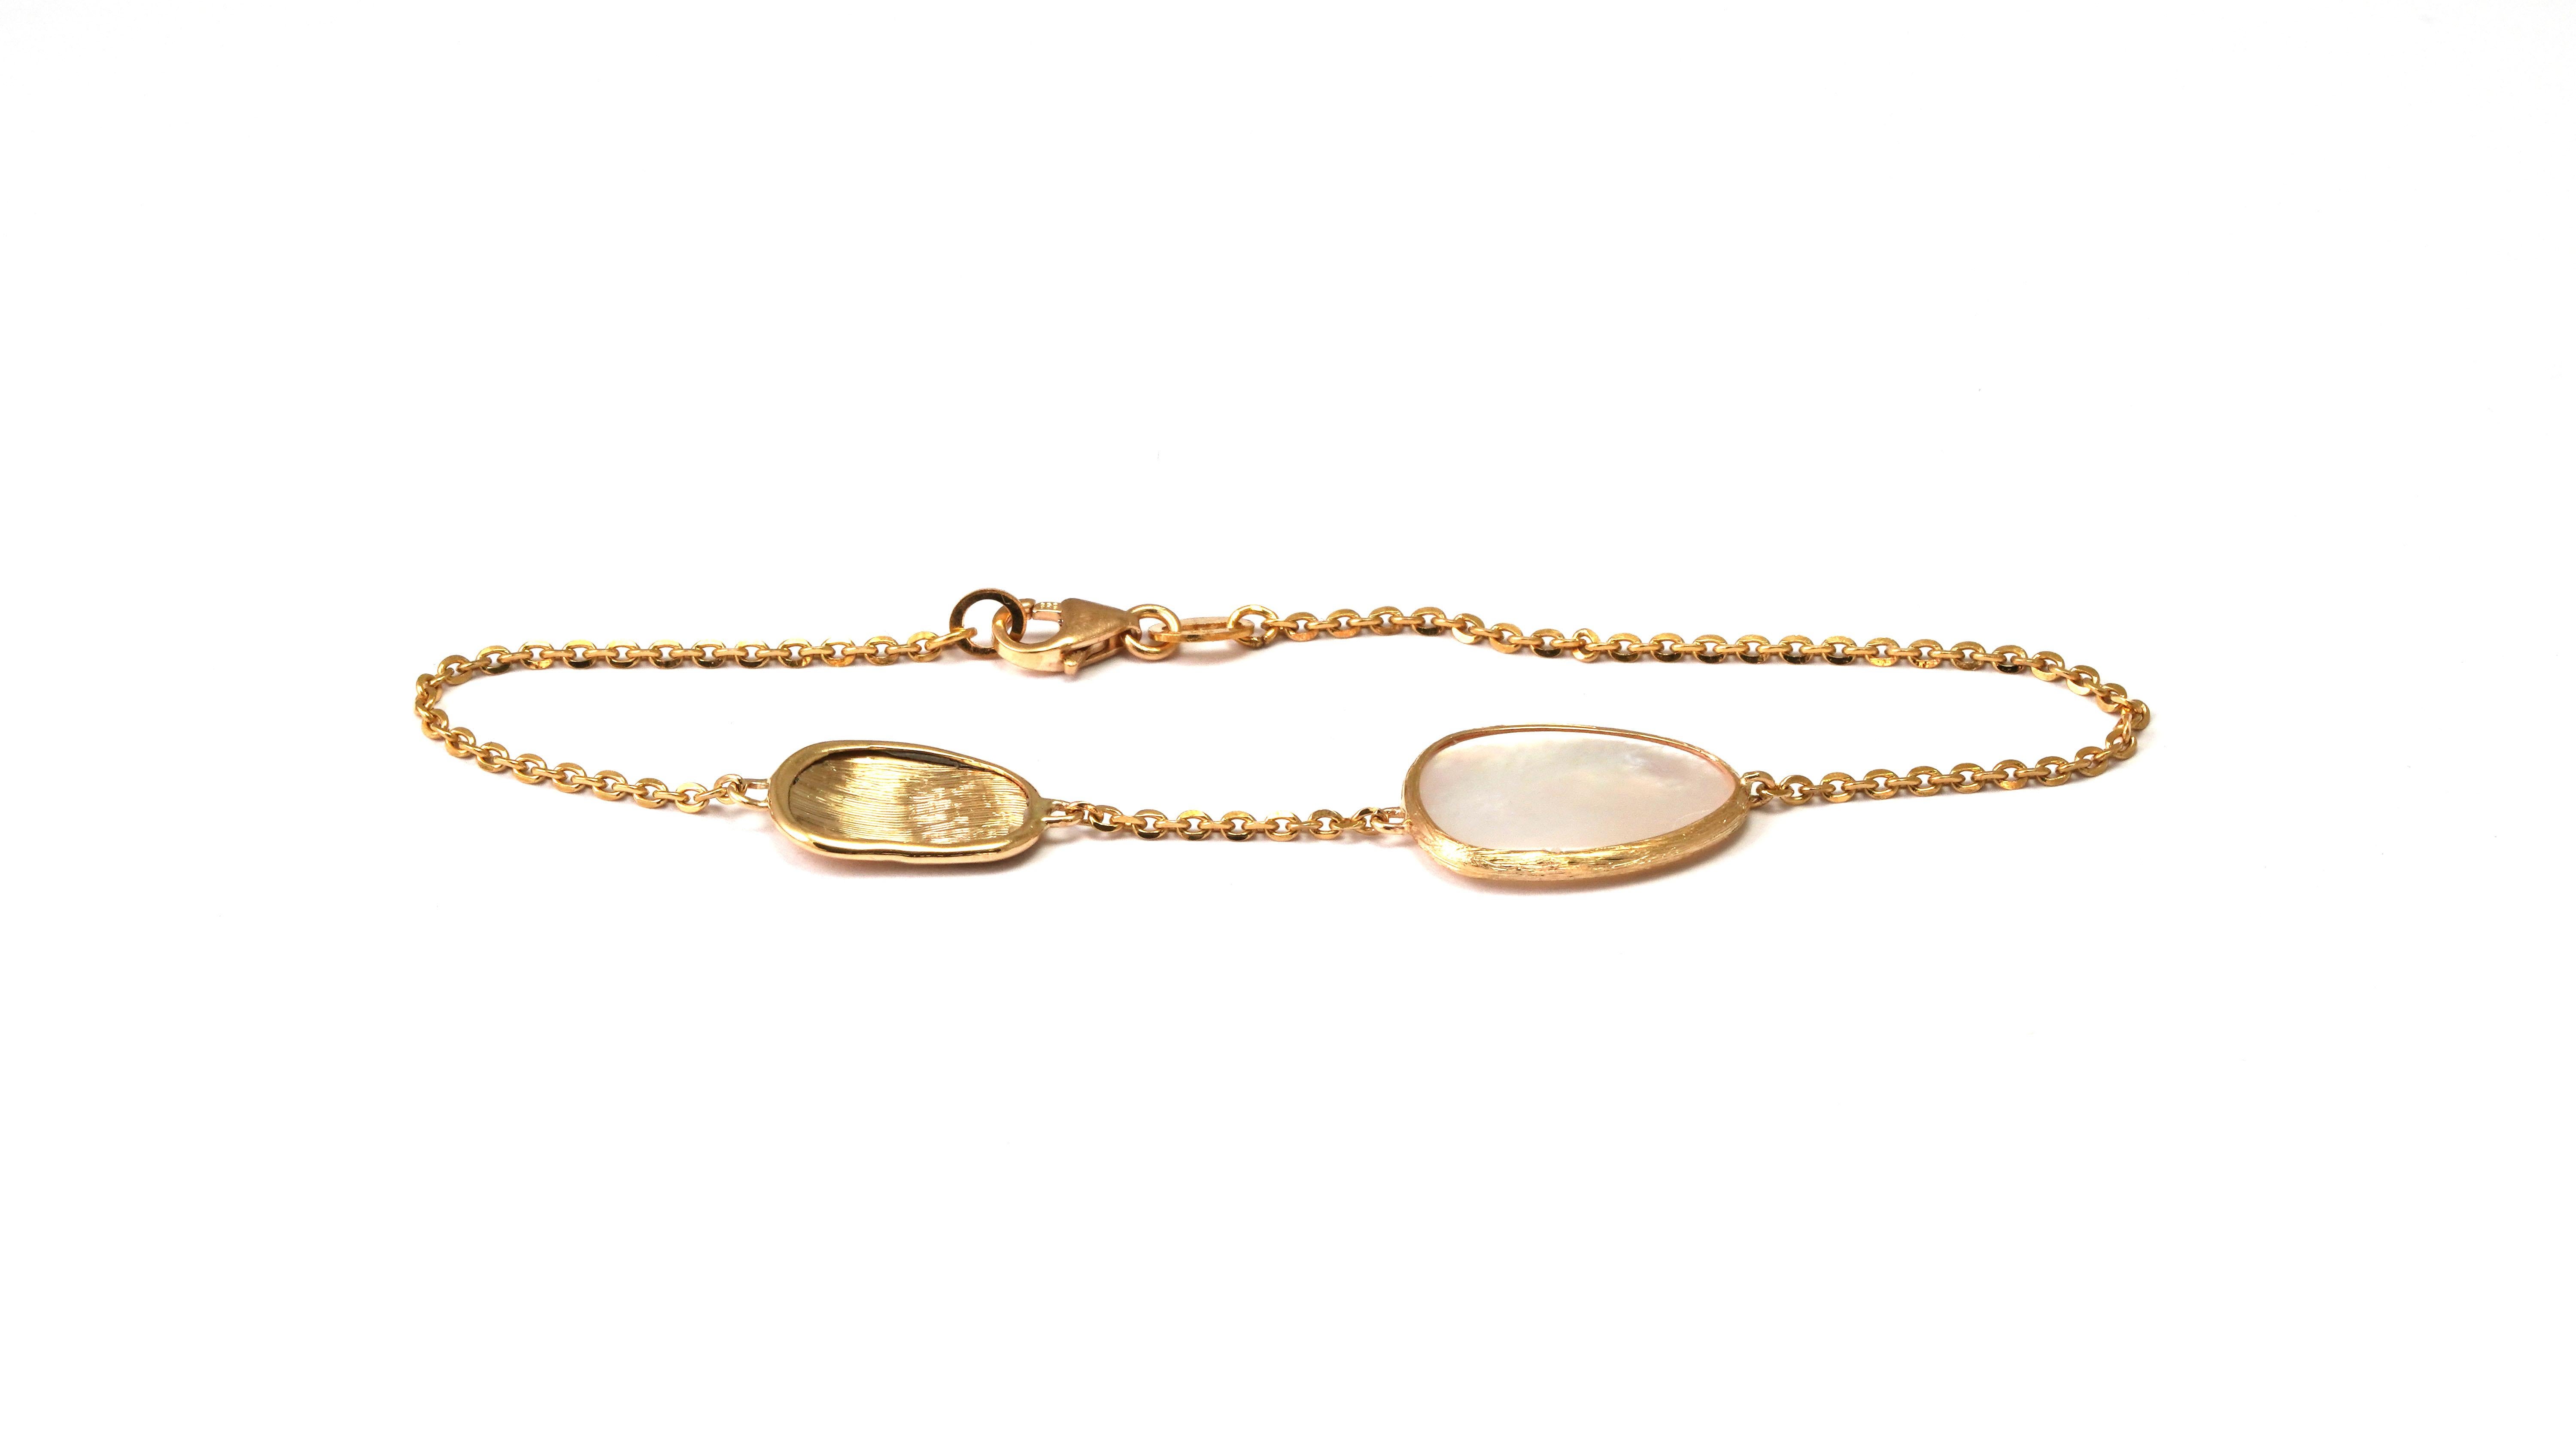 14 kt. Yellow Gold Bracelet with Mother of Pearl
Gold color: Yellow
Dimensions: 17 cm (Length). 
Total weight: 2.34 grams 

Set with:
- Mother of Pearl
Cut: Cabochon